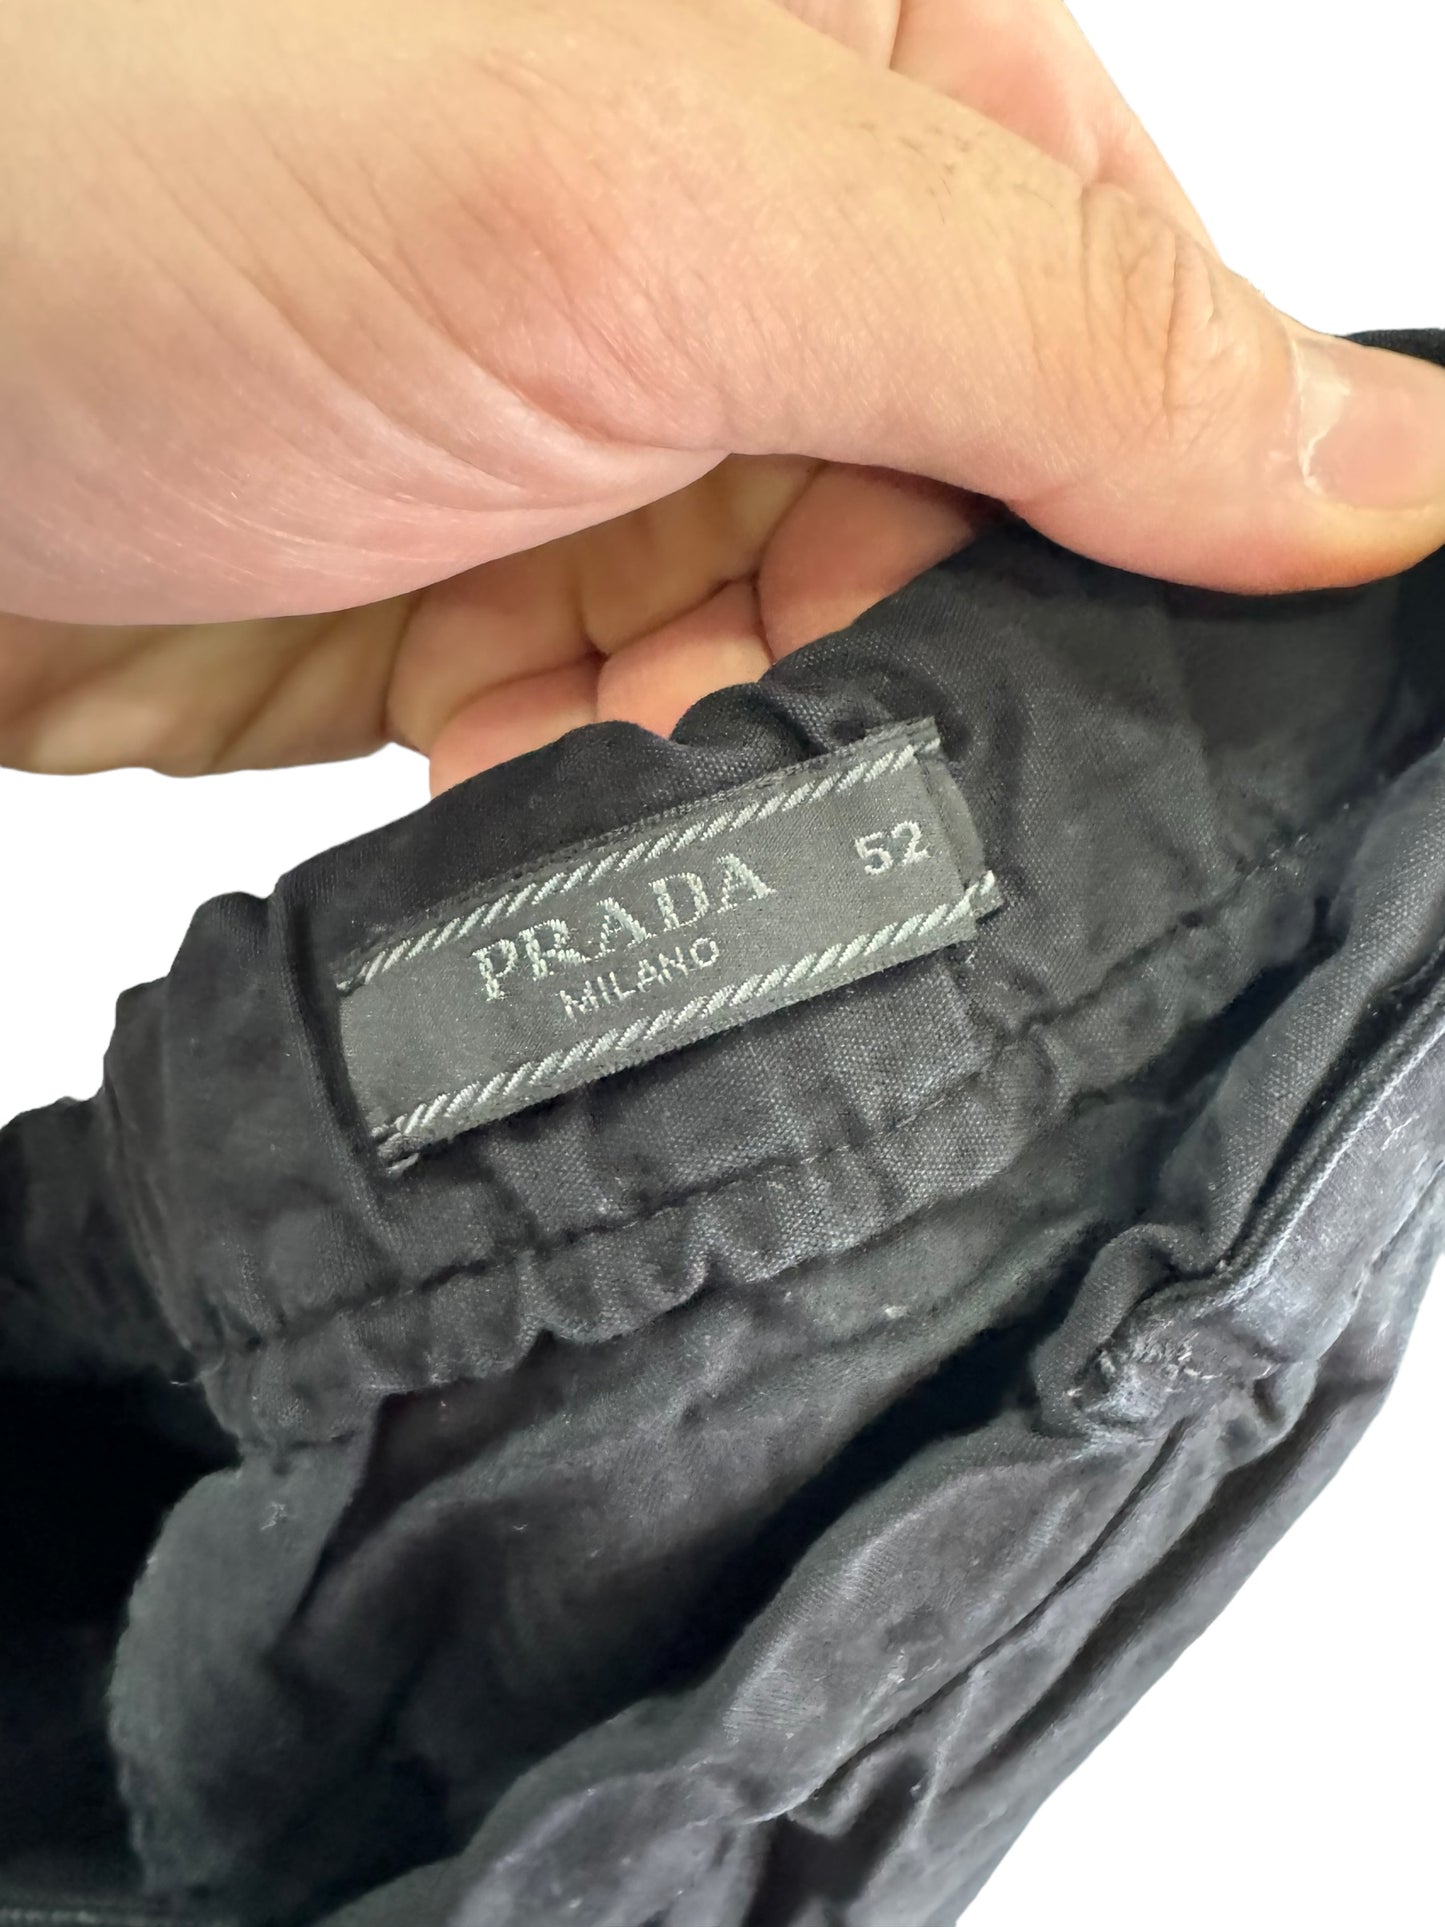 Prada Trousers Size 52 Pre-Owned